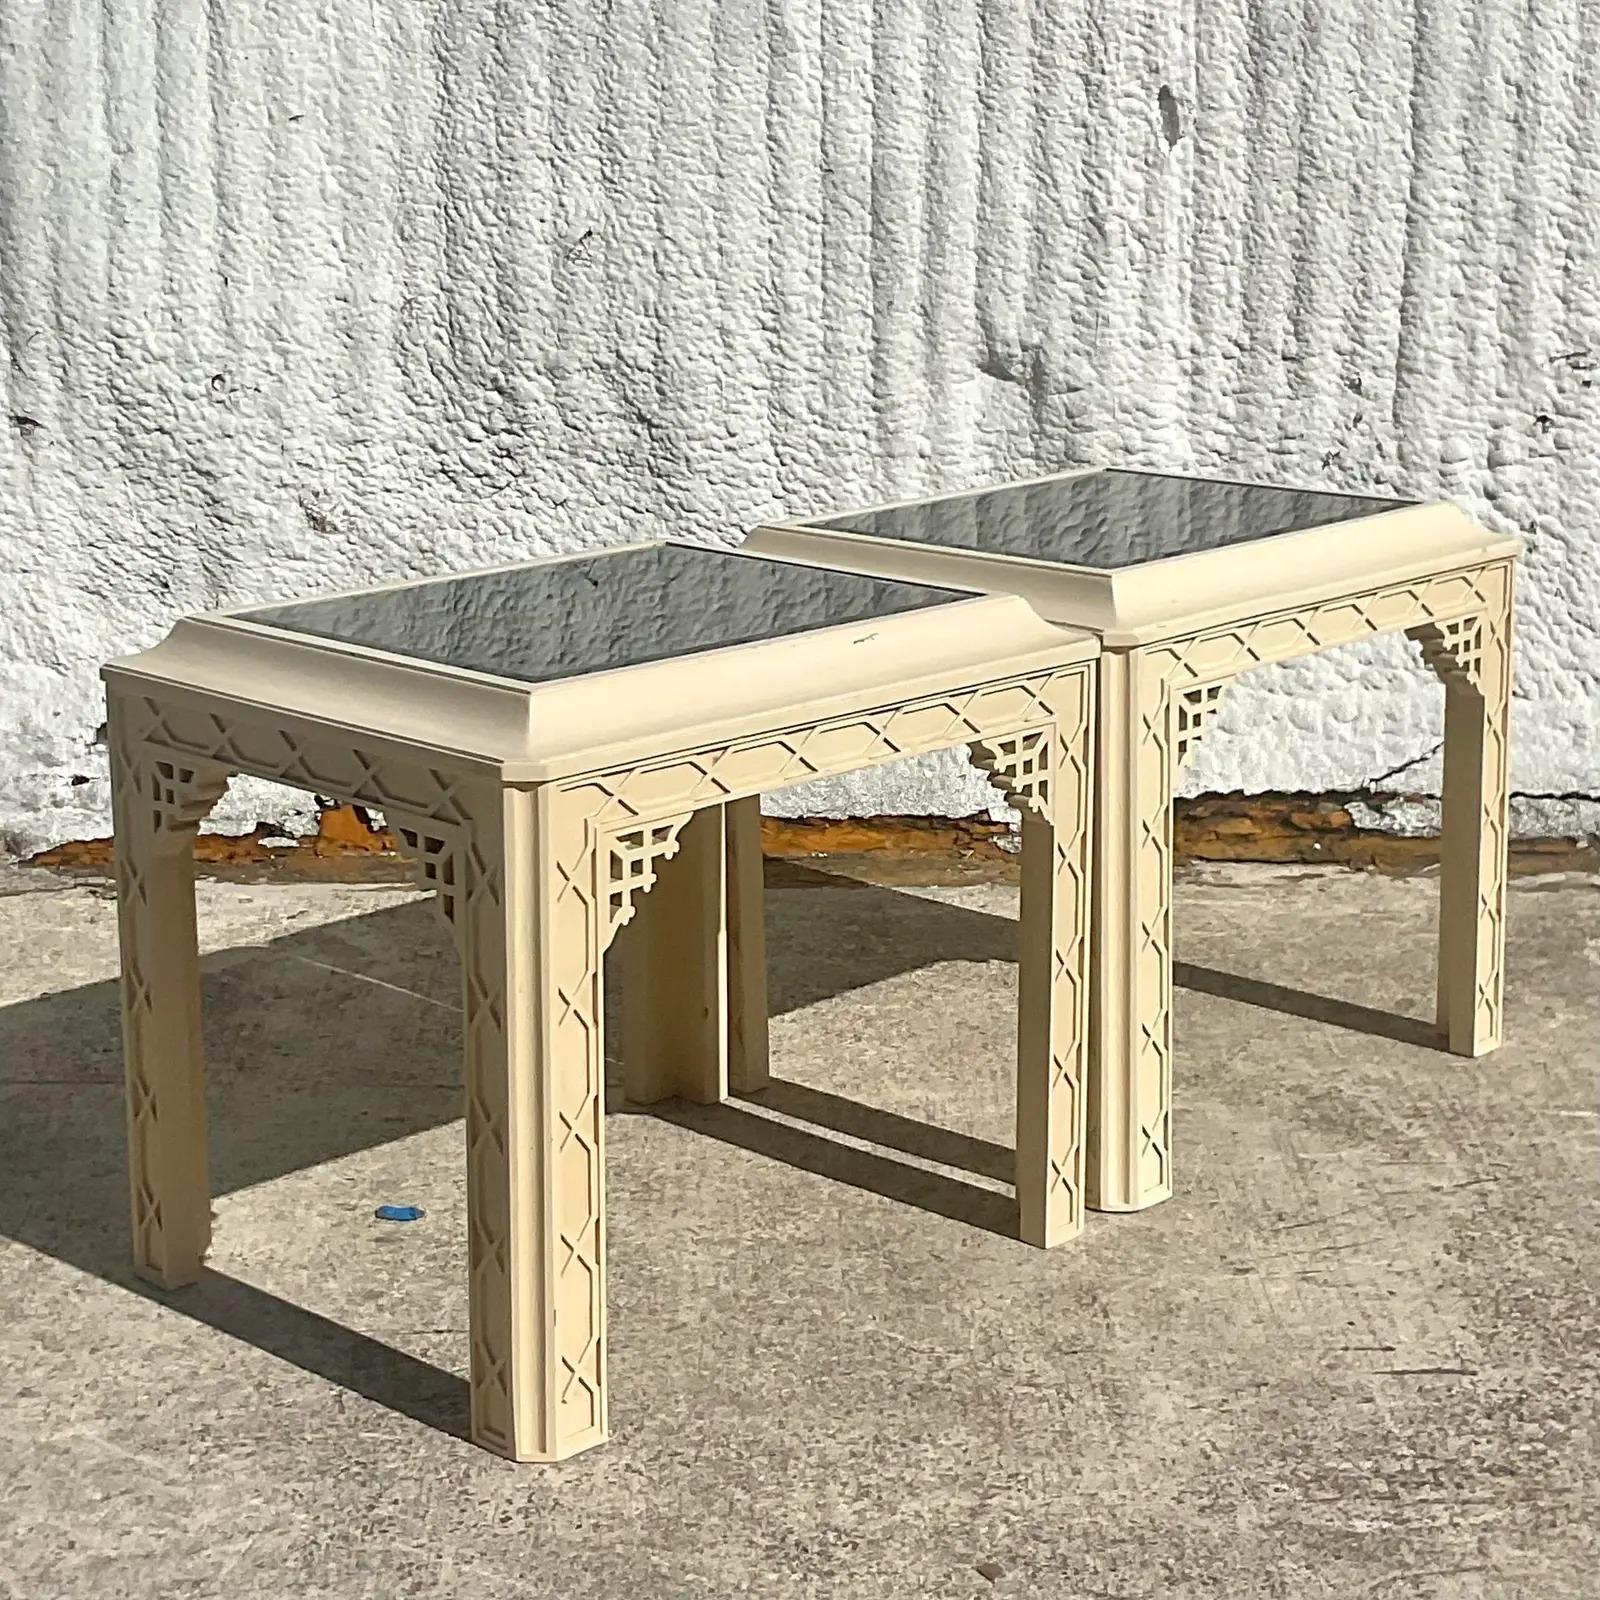 20th Century Vintage Regency Fretwork Side Tables - a Pair For Sale